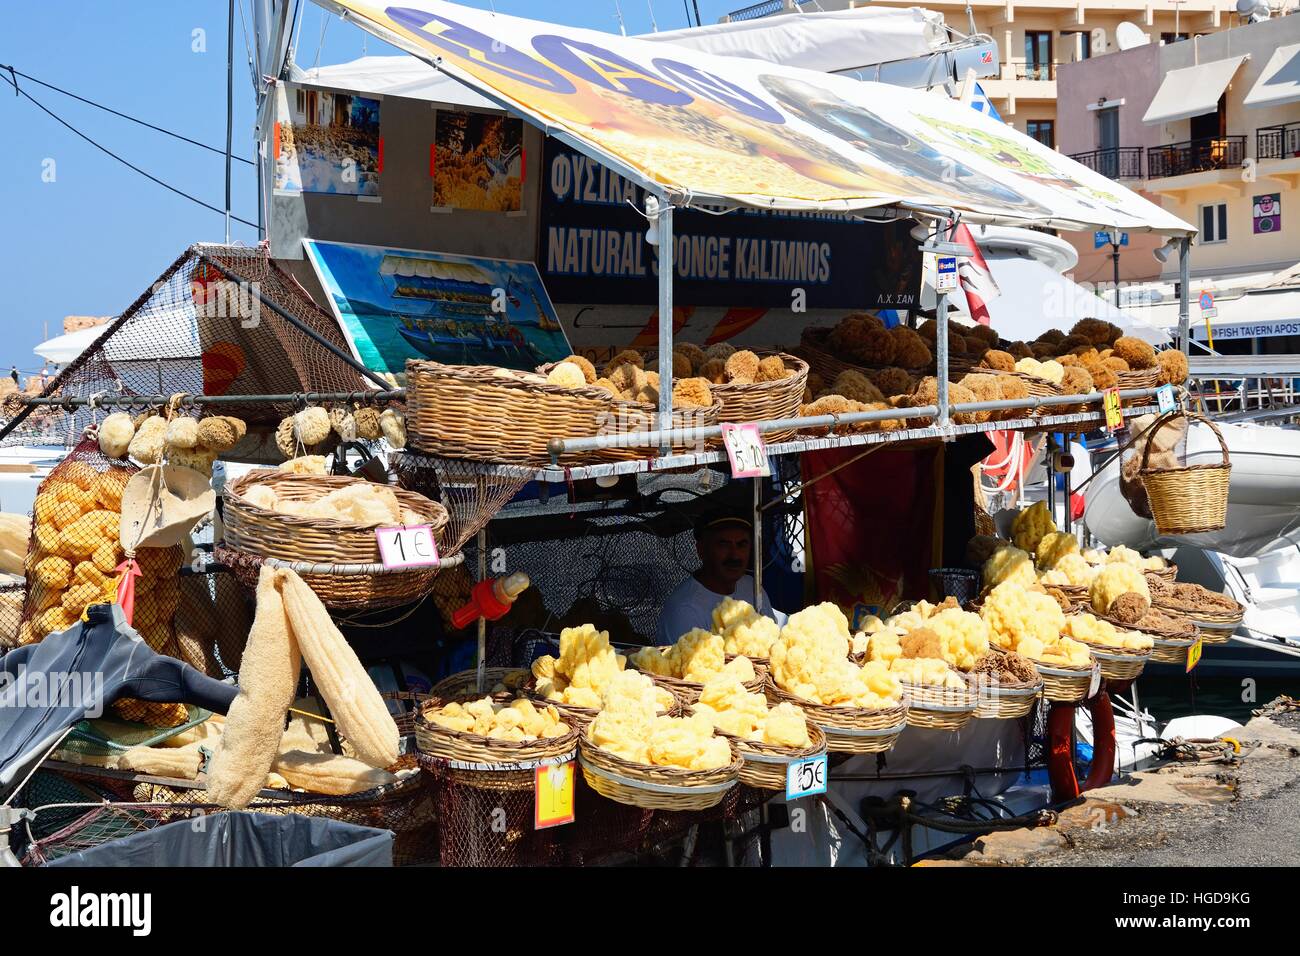 Natural sponges and gifts for sale on a boat in the harbour, Chania, Crete, Greece, Europe. Stock Photo